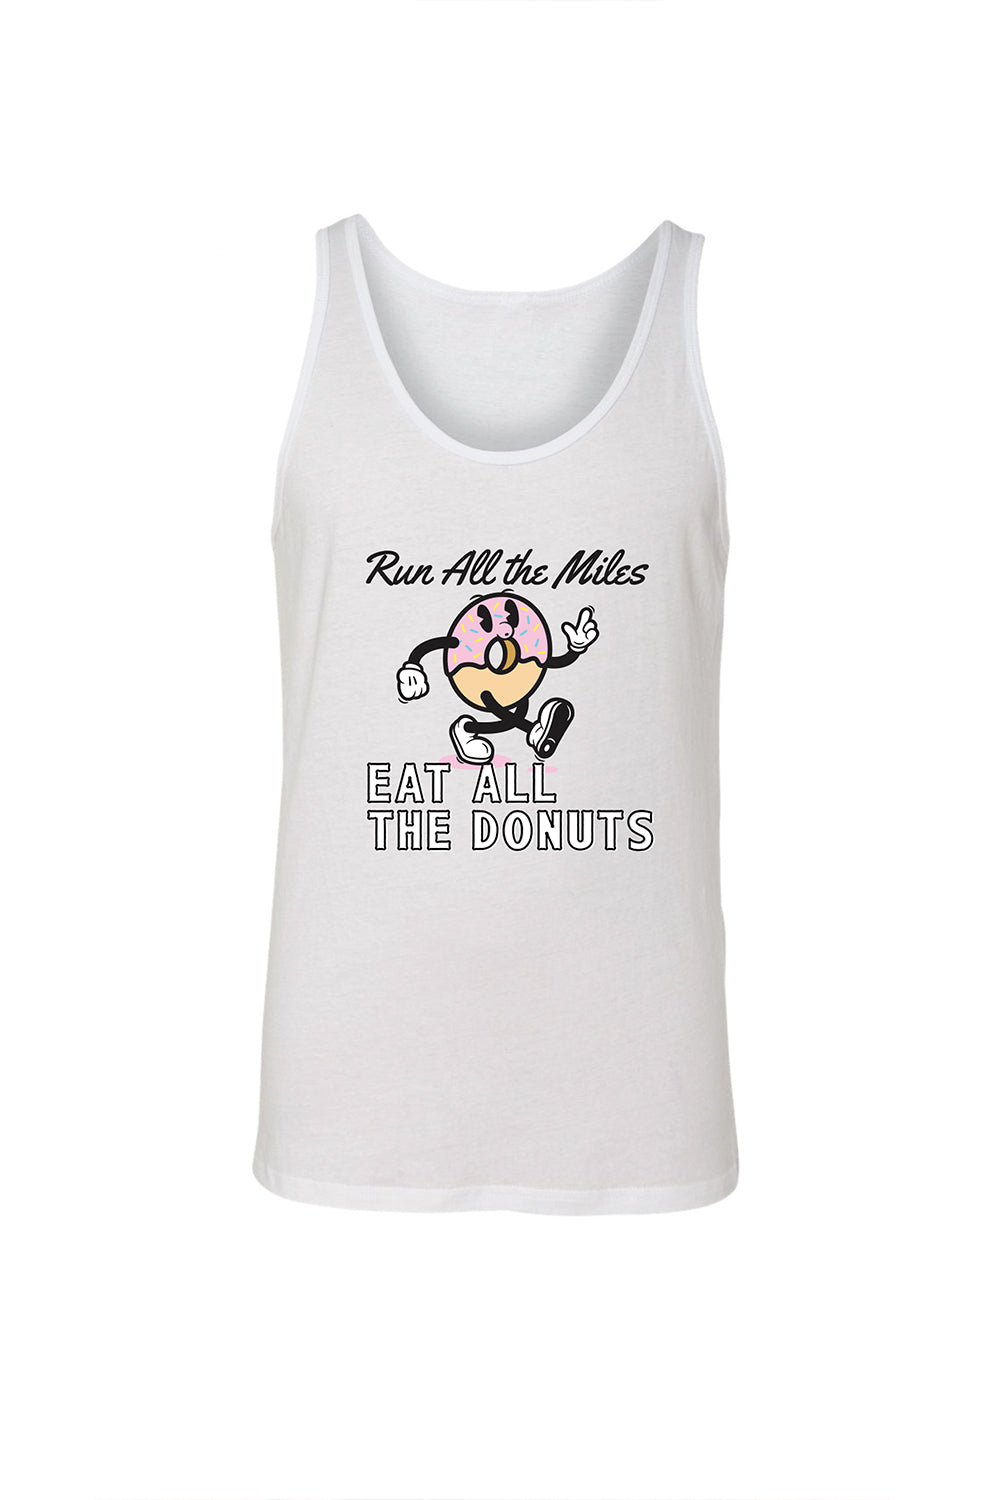 Run All The Miles, Eat All The Donuts Tank